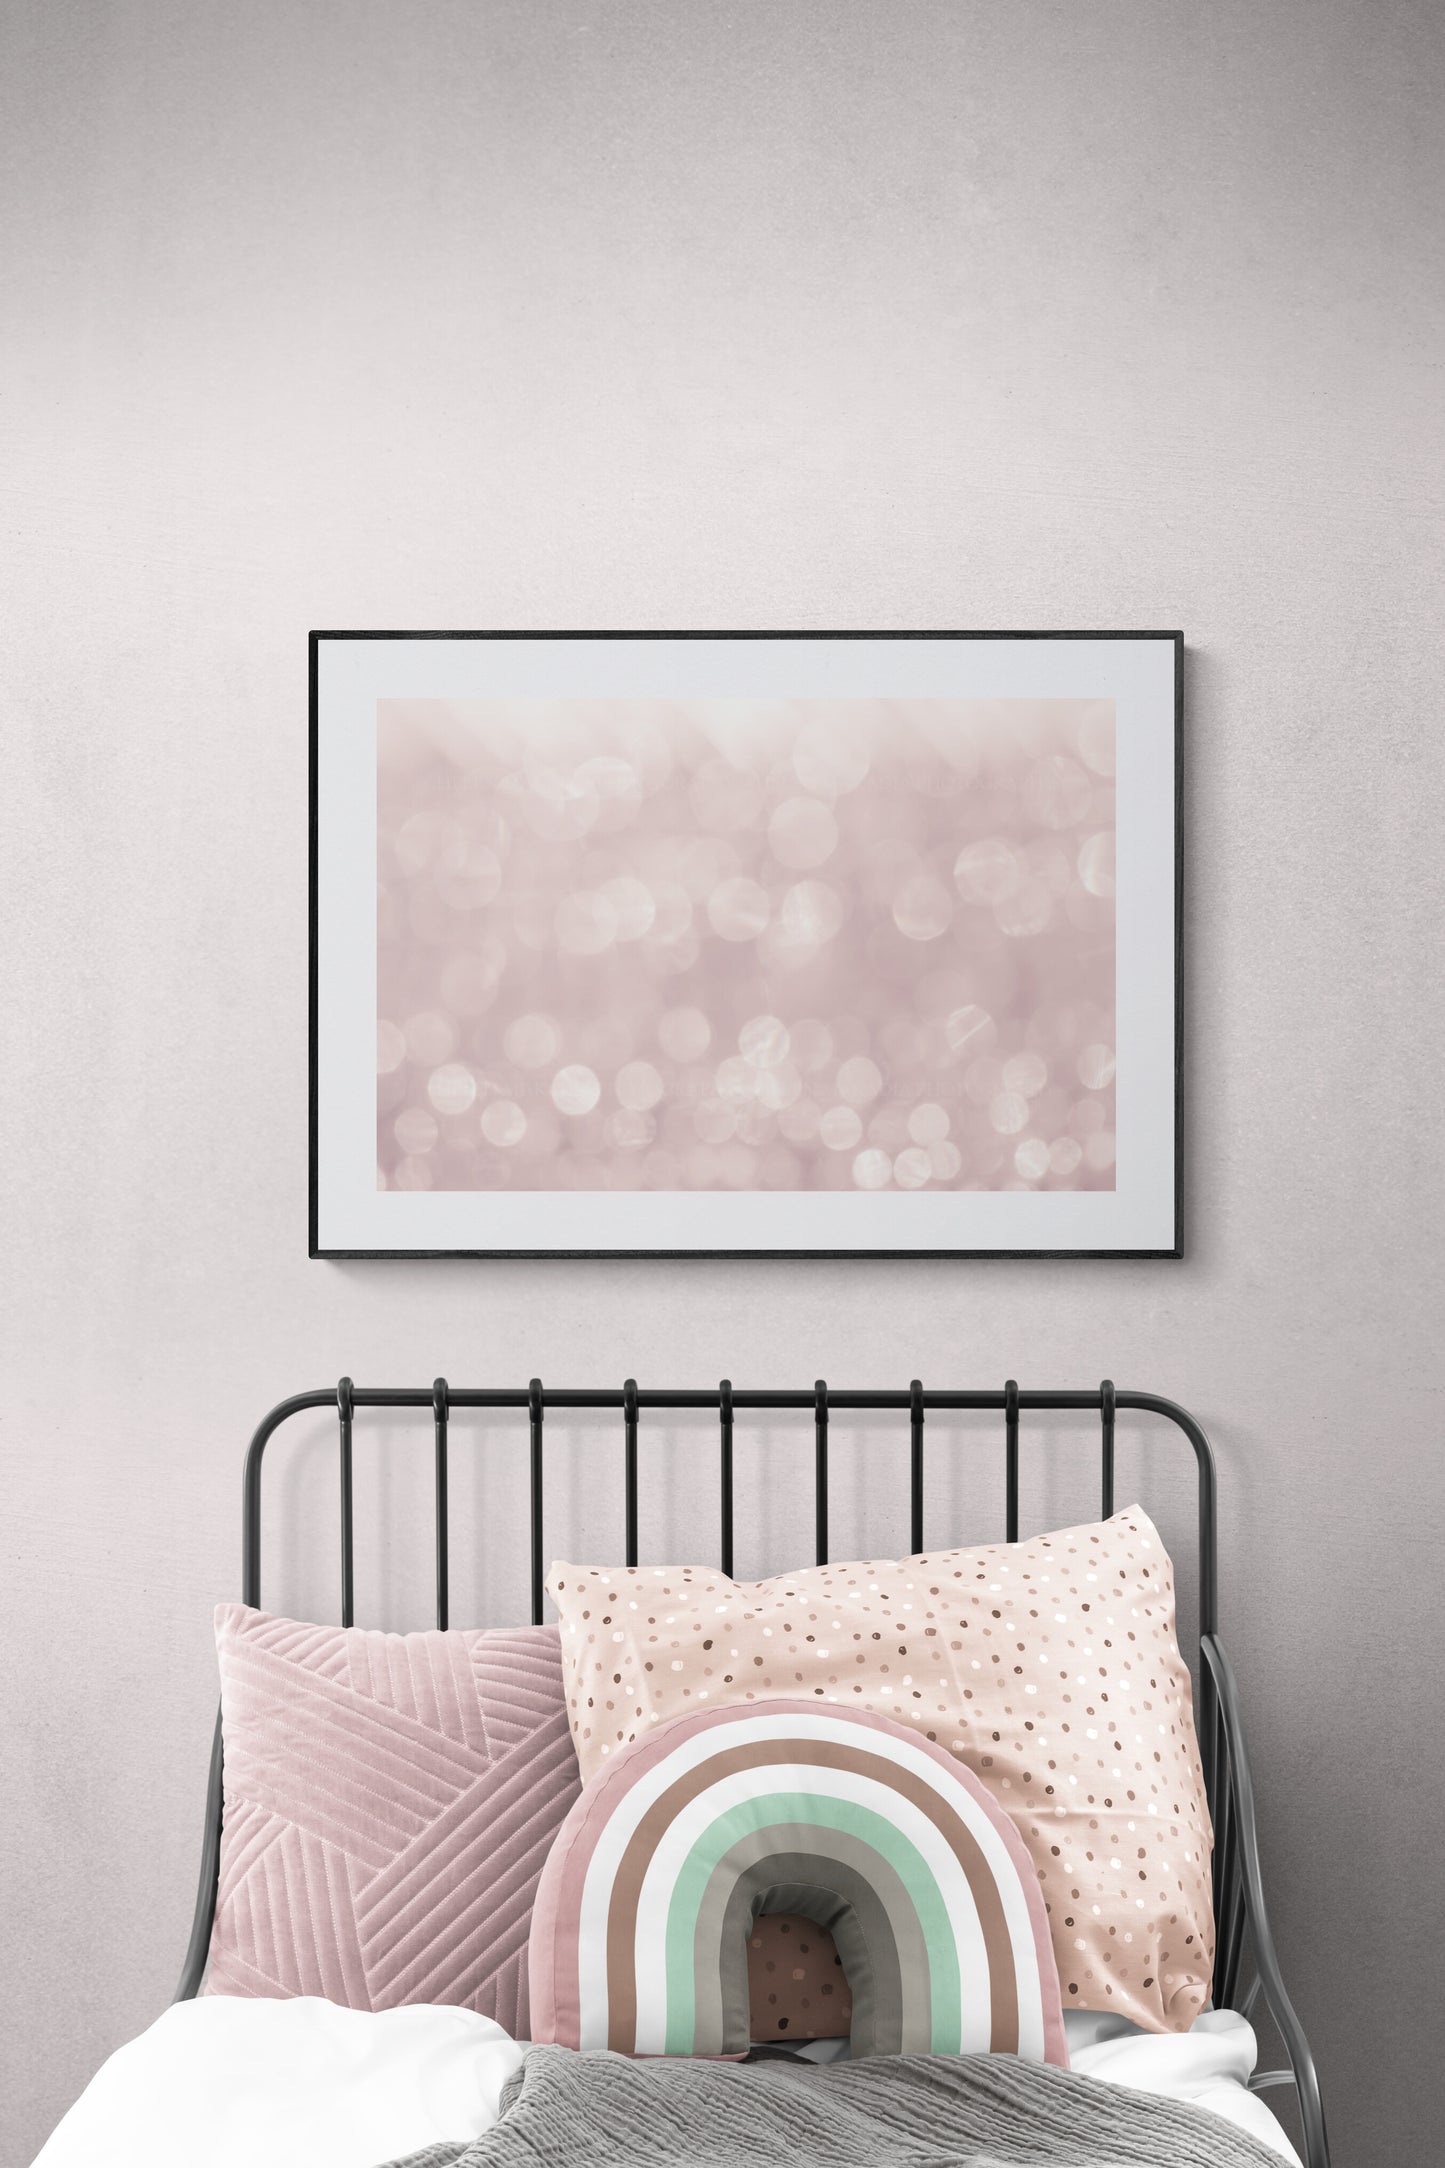 Pink Wall Art Bubbles Photograph as wall art in a child's bedroom